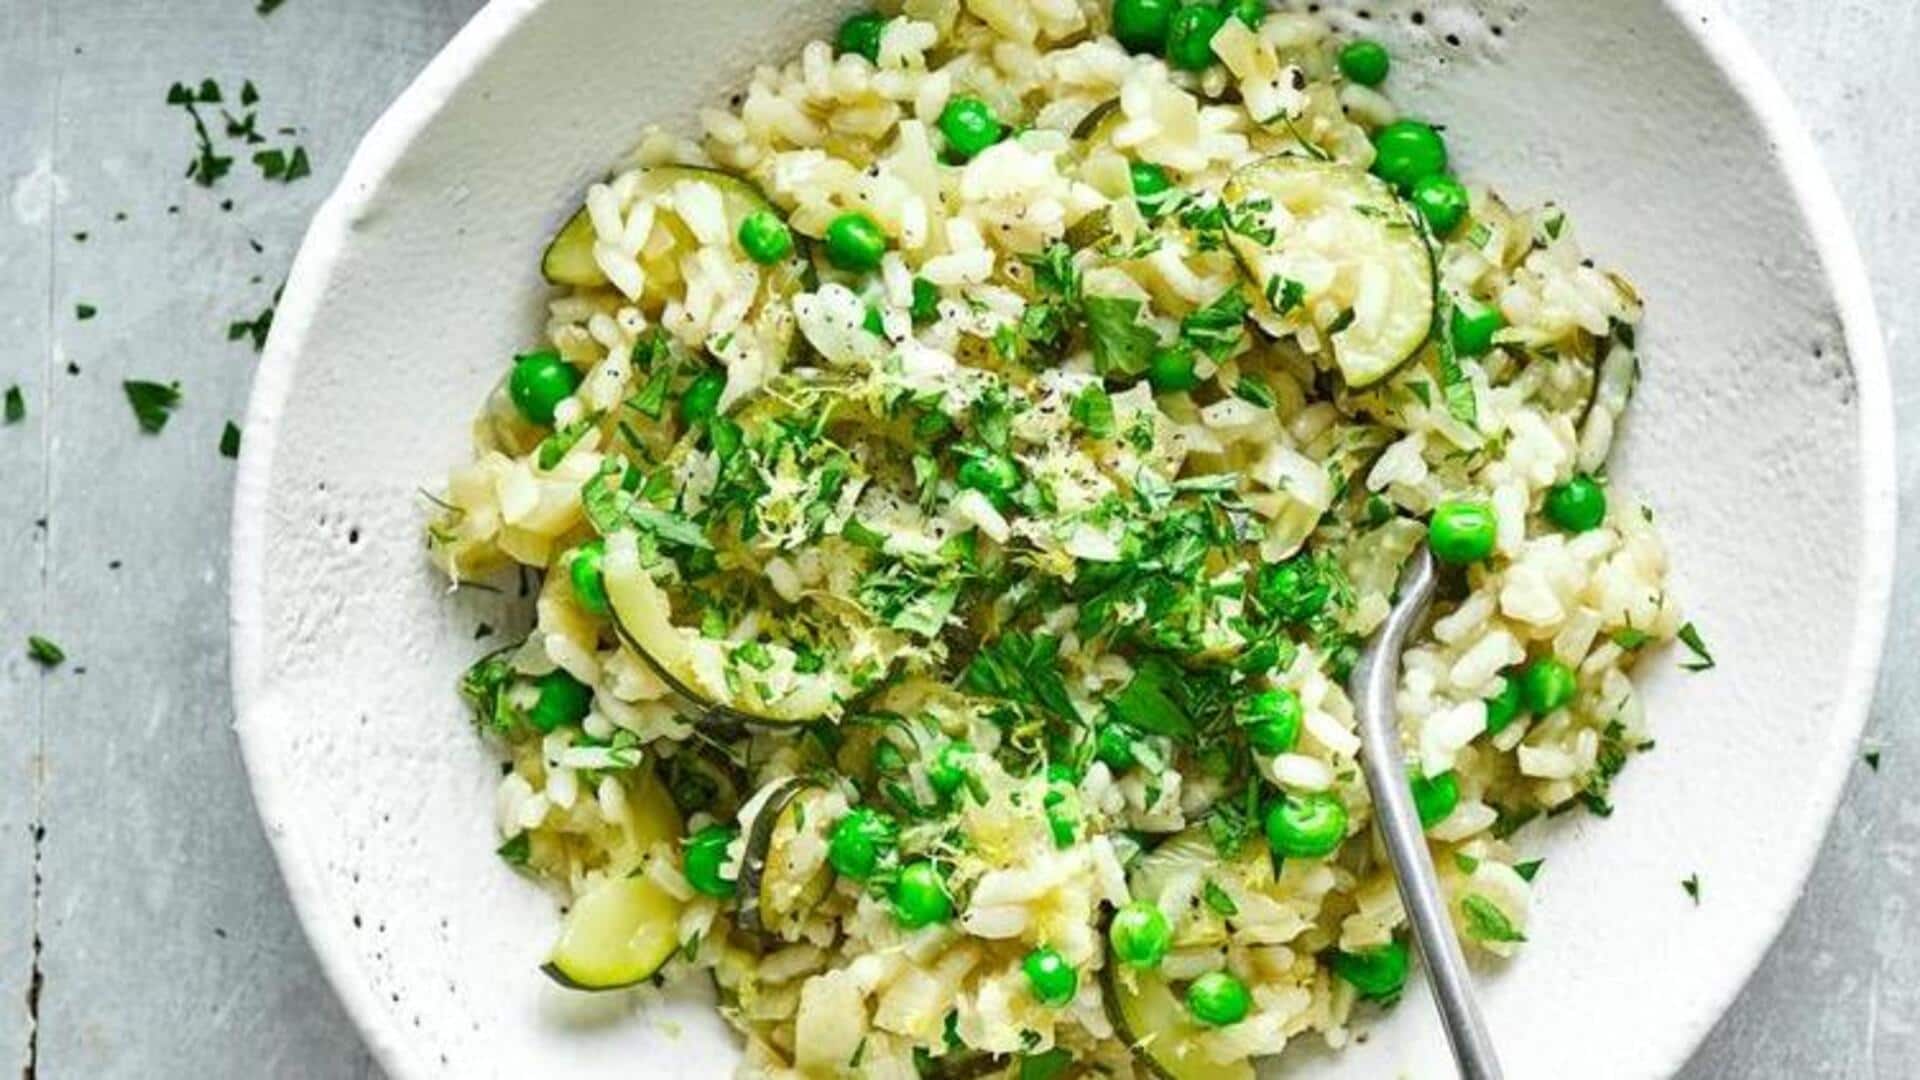 Indulge in these delicious dairy-free vegan risotto